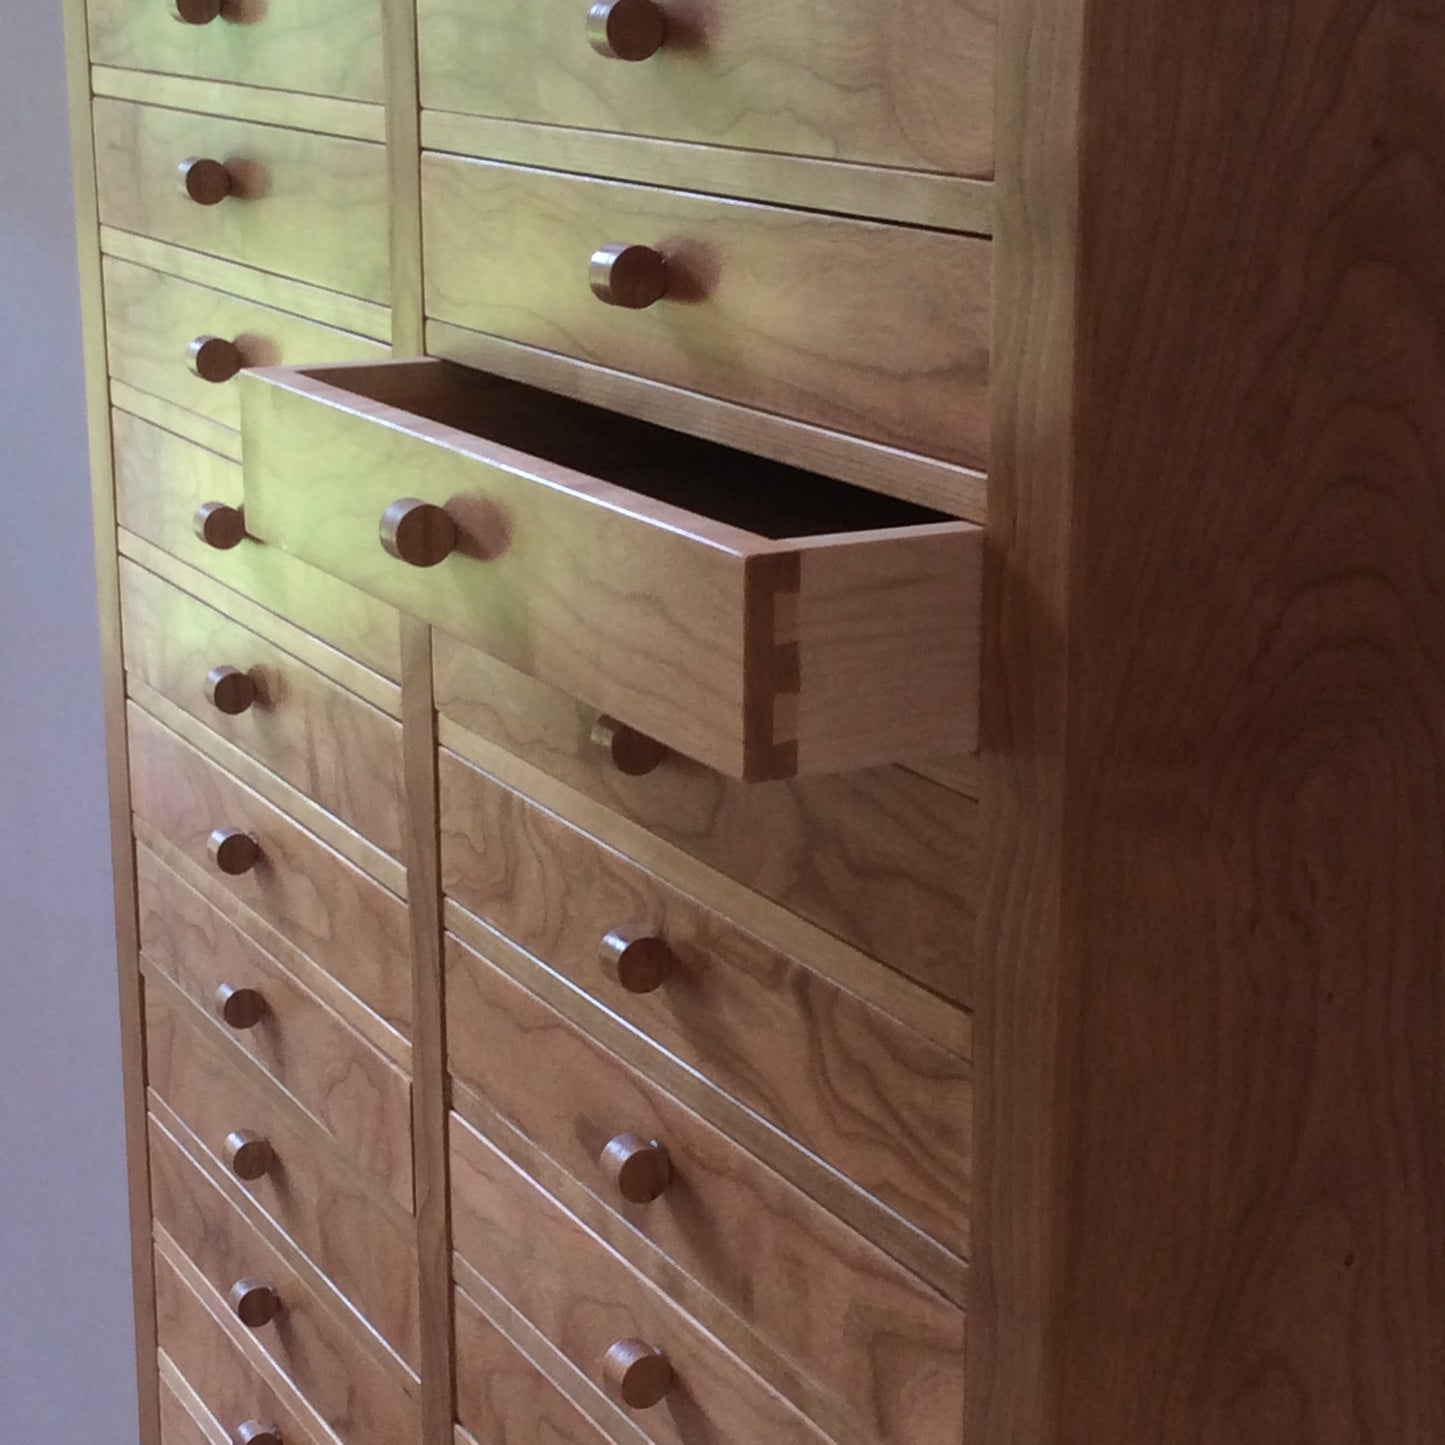 Large Storage Cabinet with Drawers